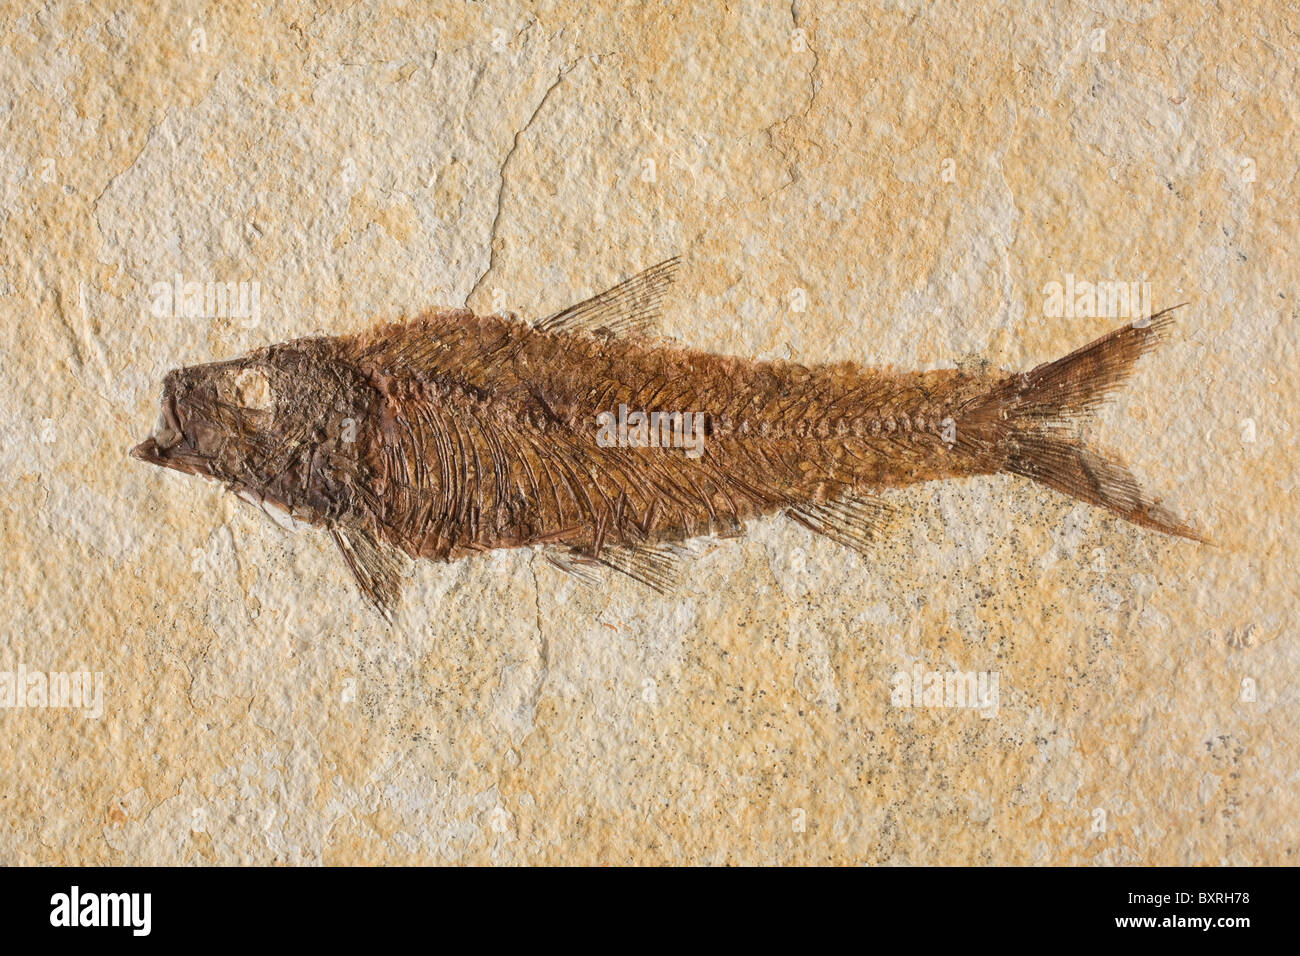 close-up fish fossil with lots of detail Stock Photo